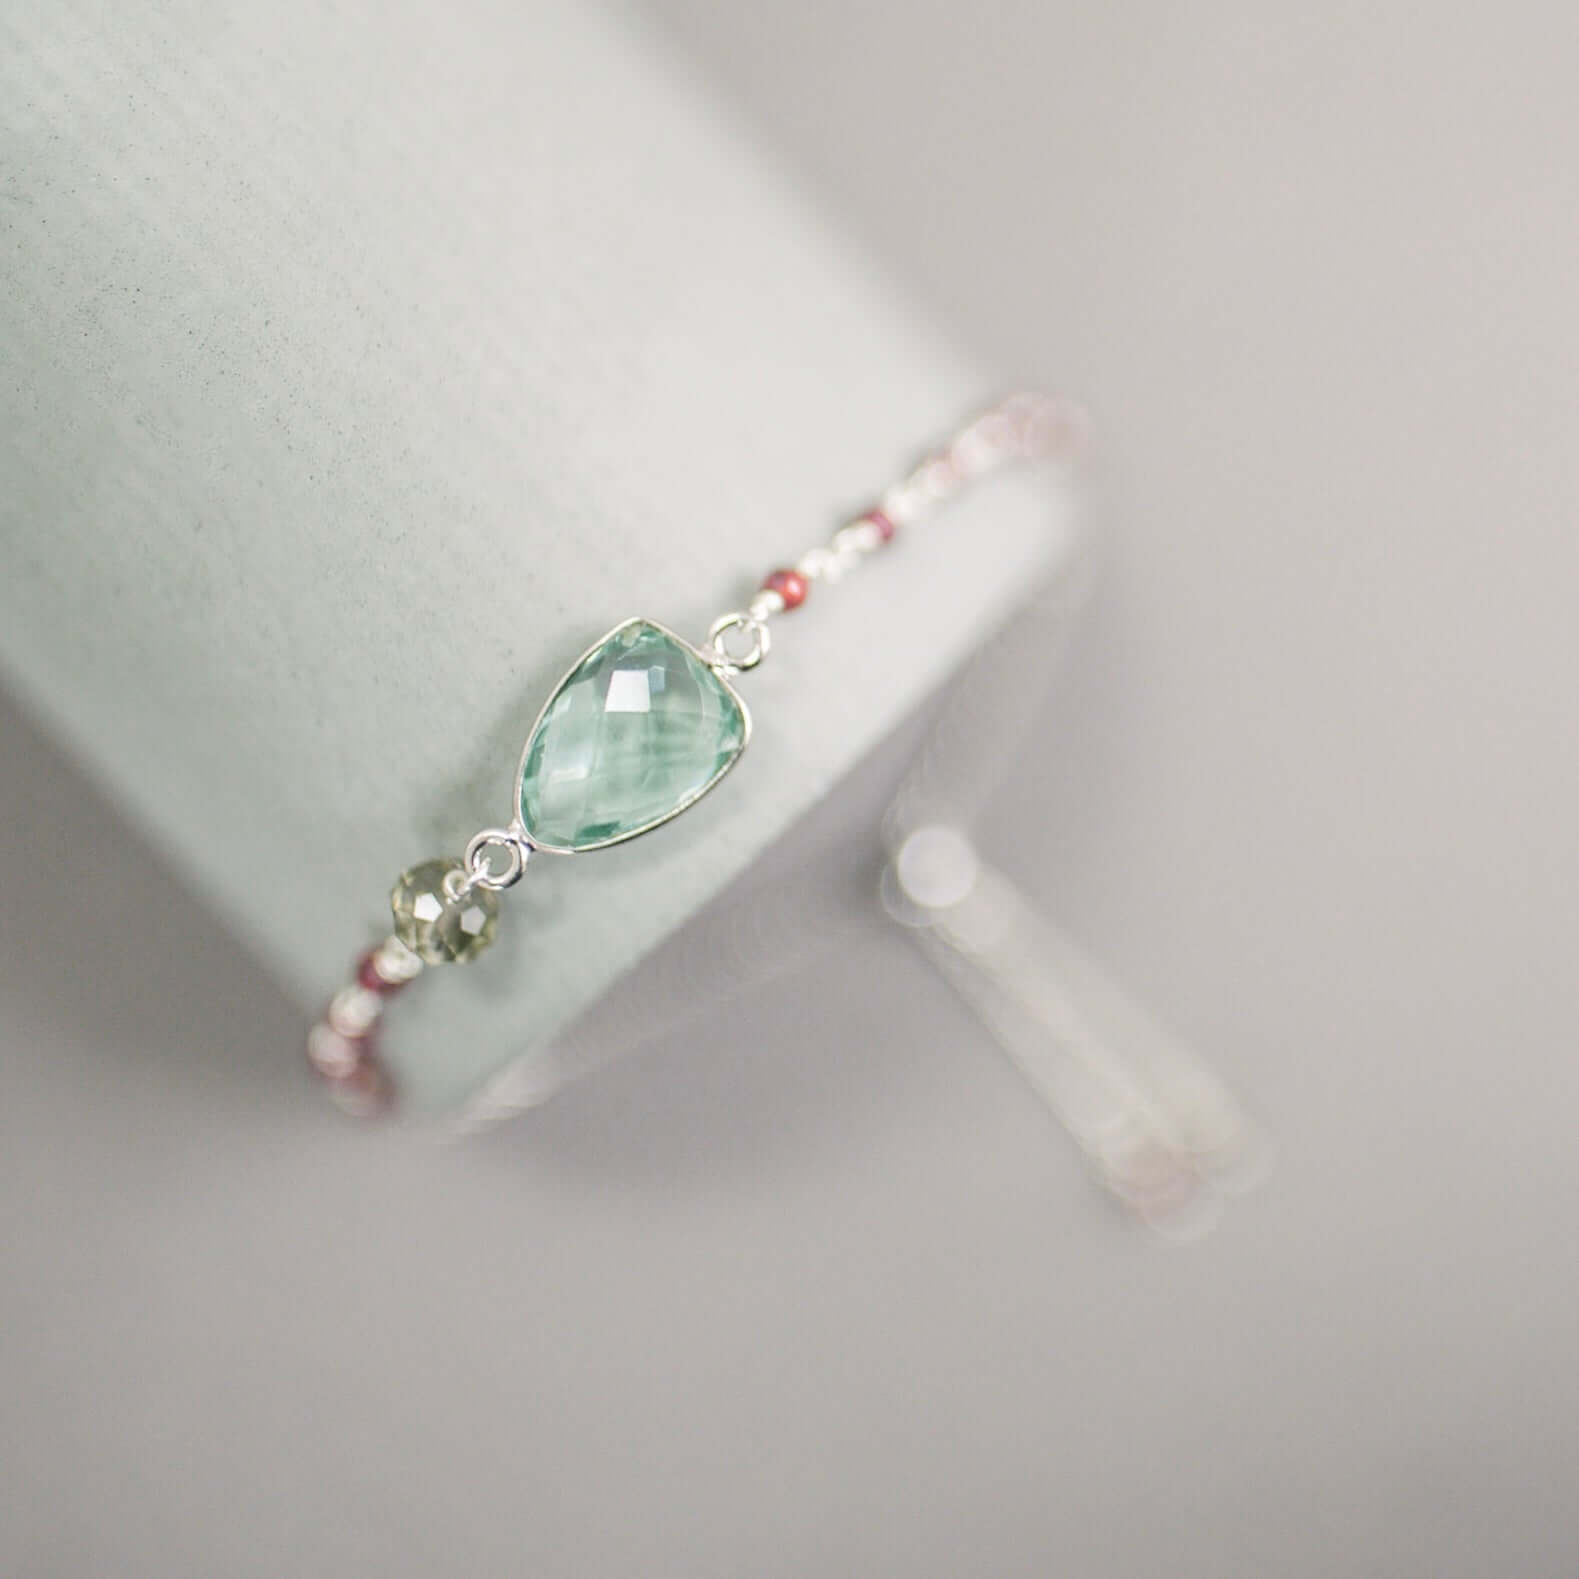 Rhodium plated Adjustable Bracelet with Green Amethyst Bezel and Tiny Gemstone Accents.